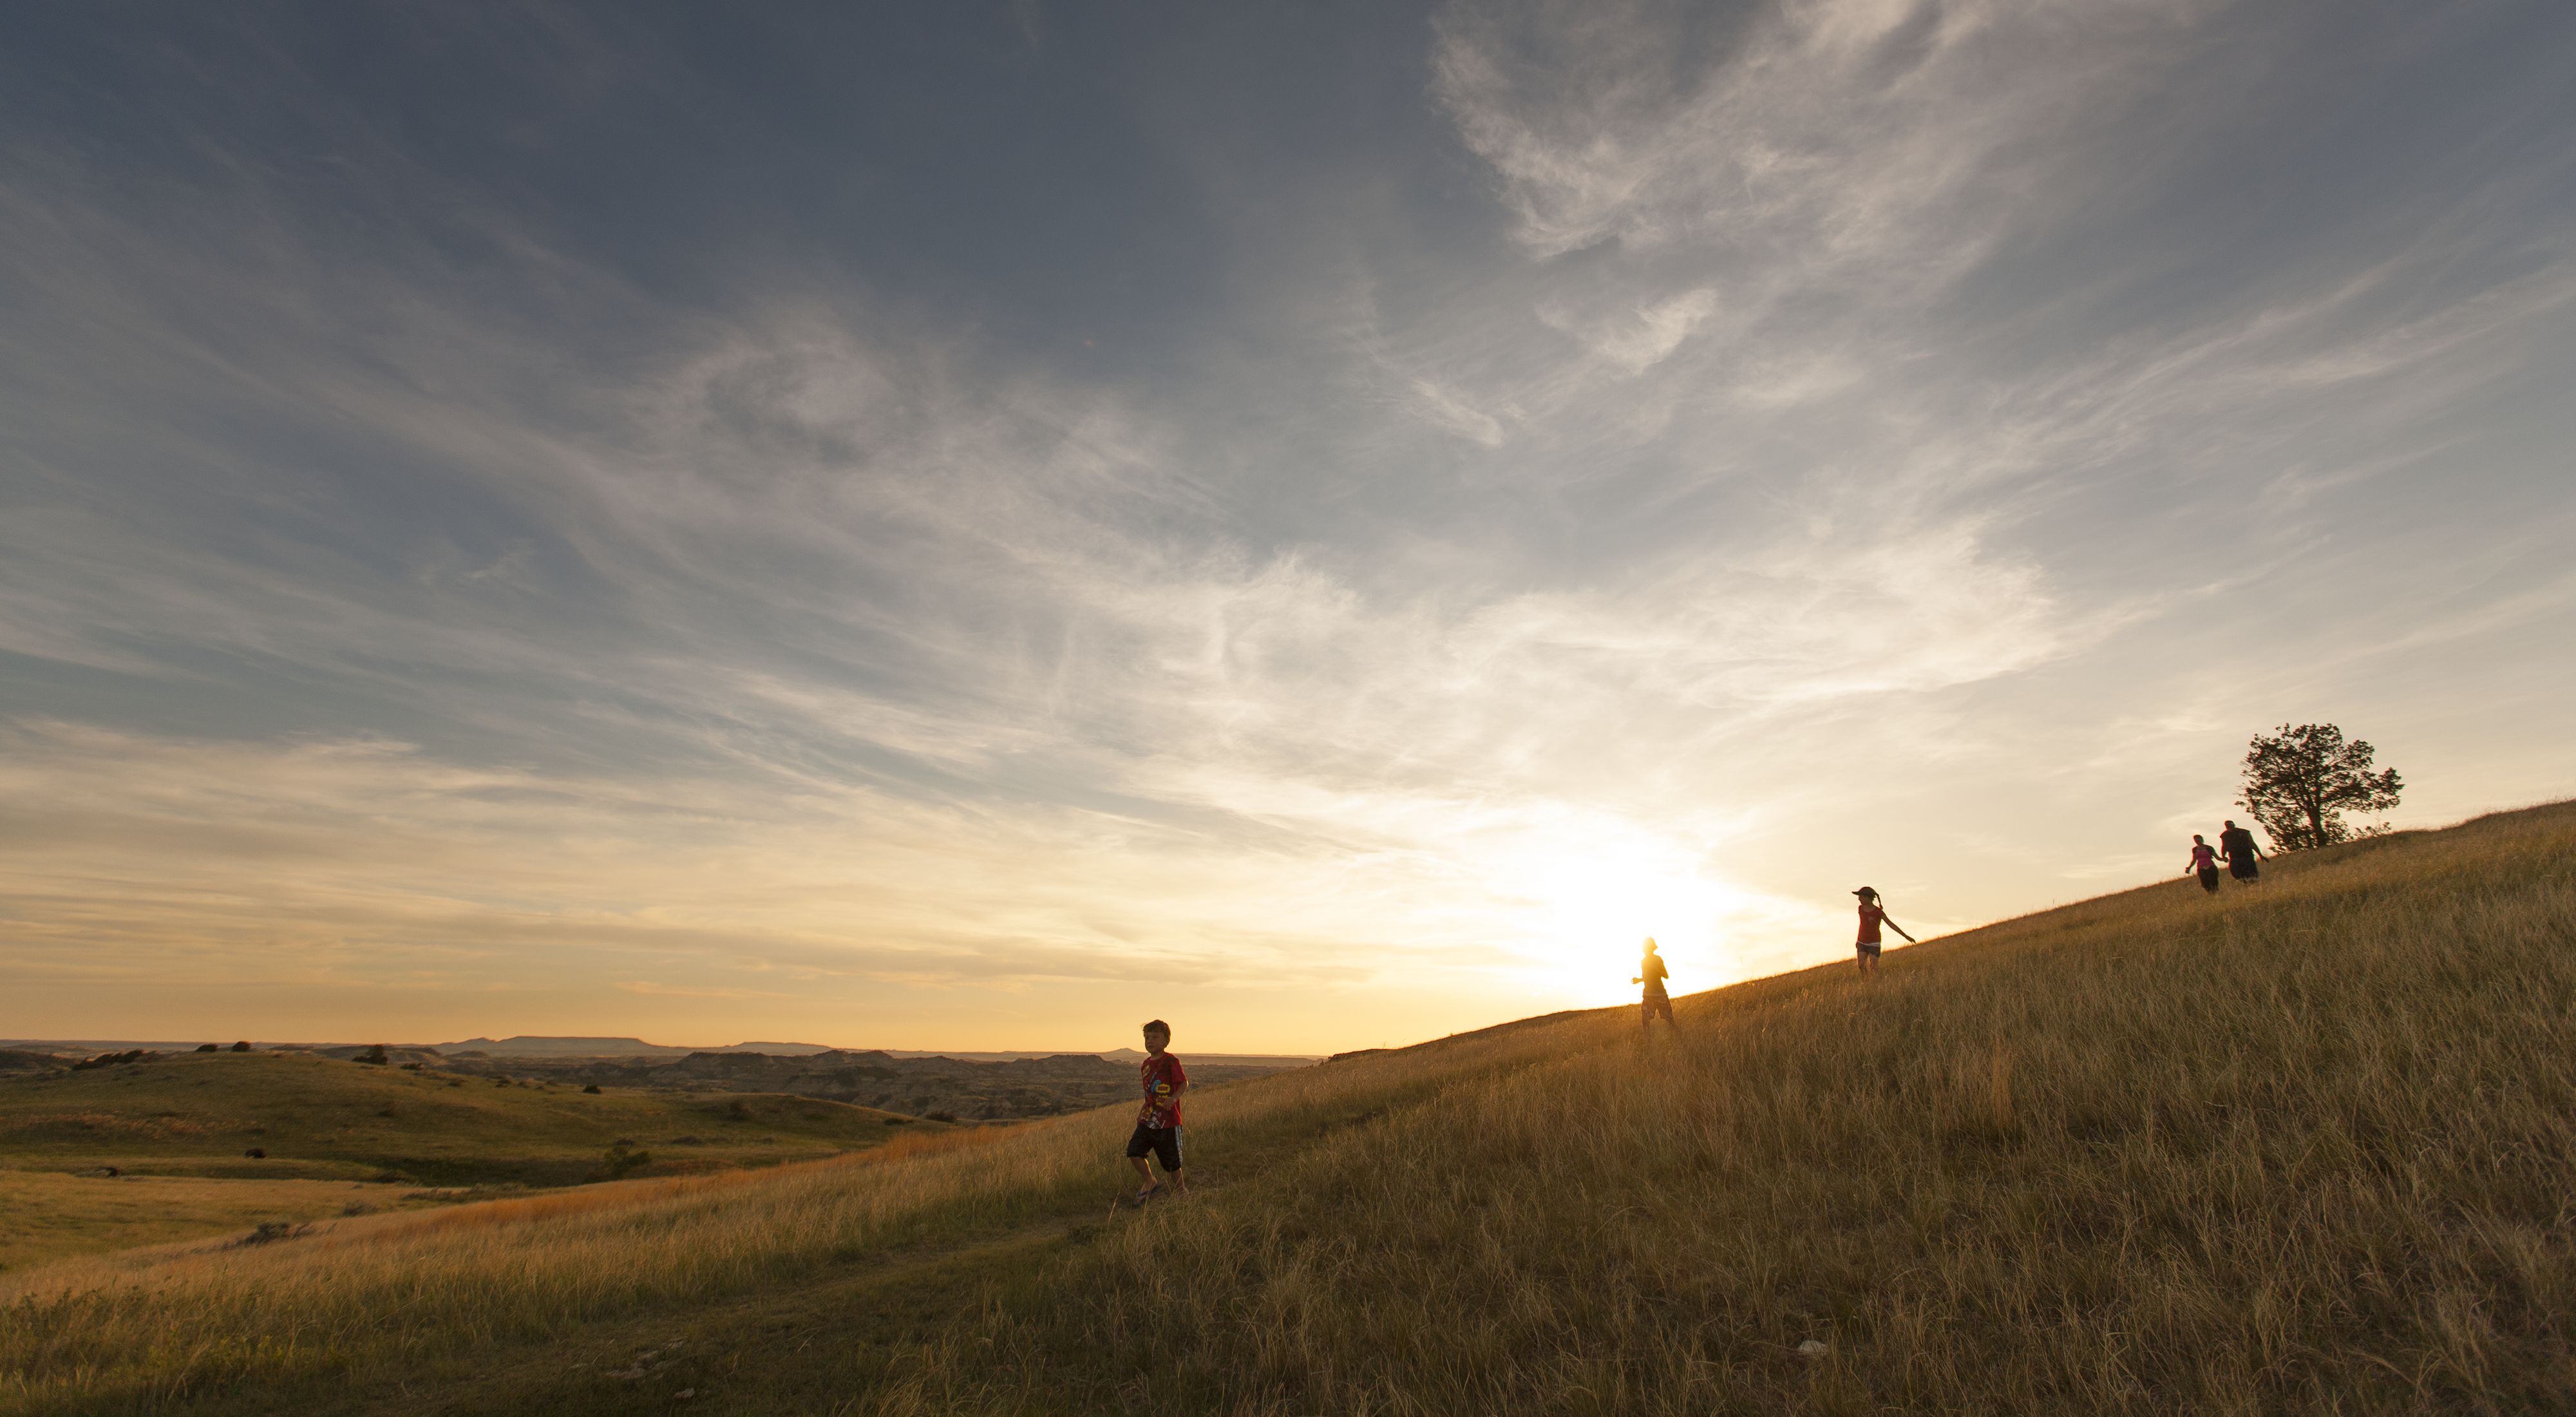 Kids run down a hillside trail ahead of their parents in with rolling grassy hills in the distance and the sun setting behind them.